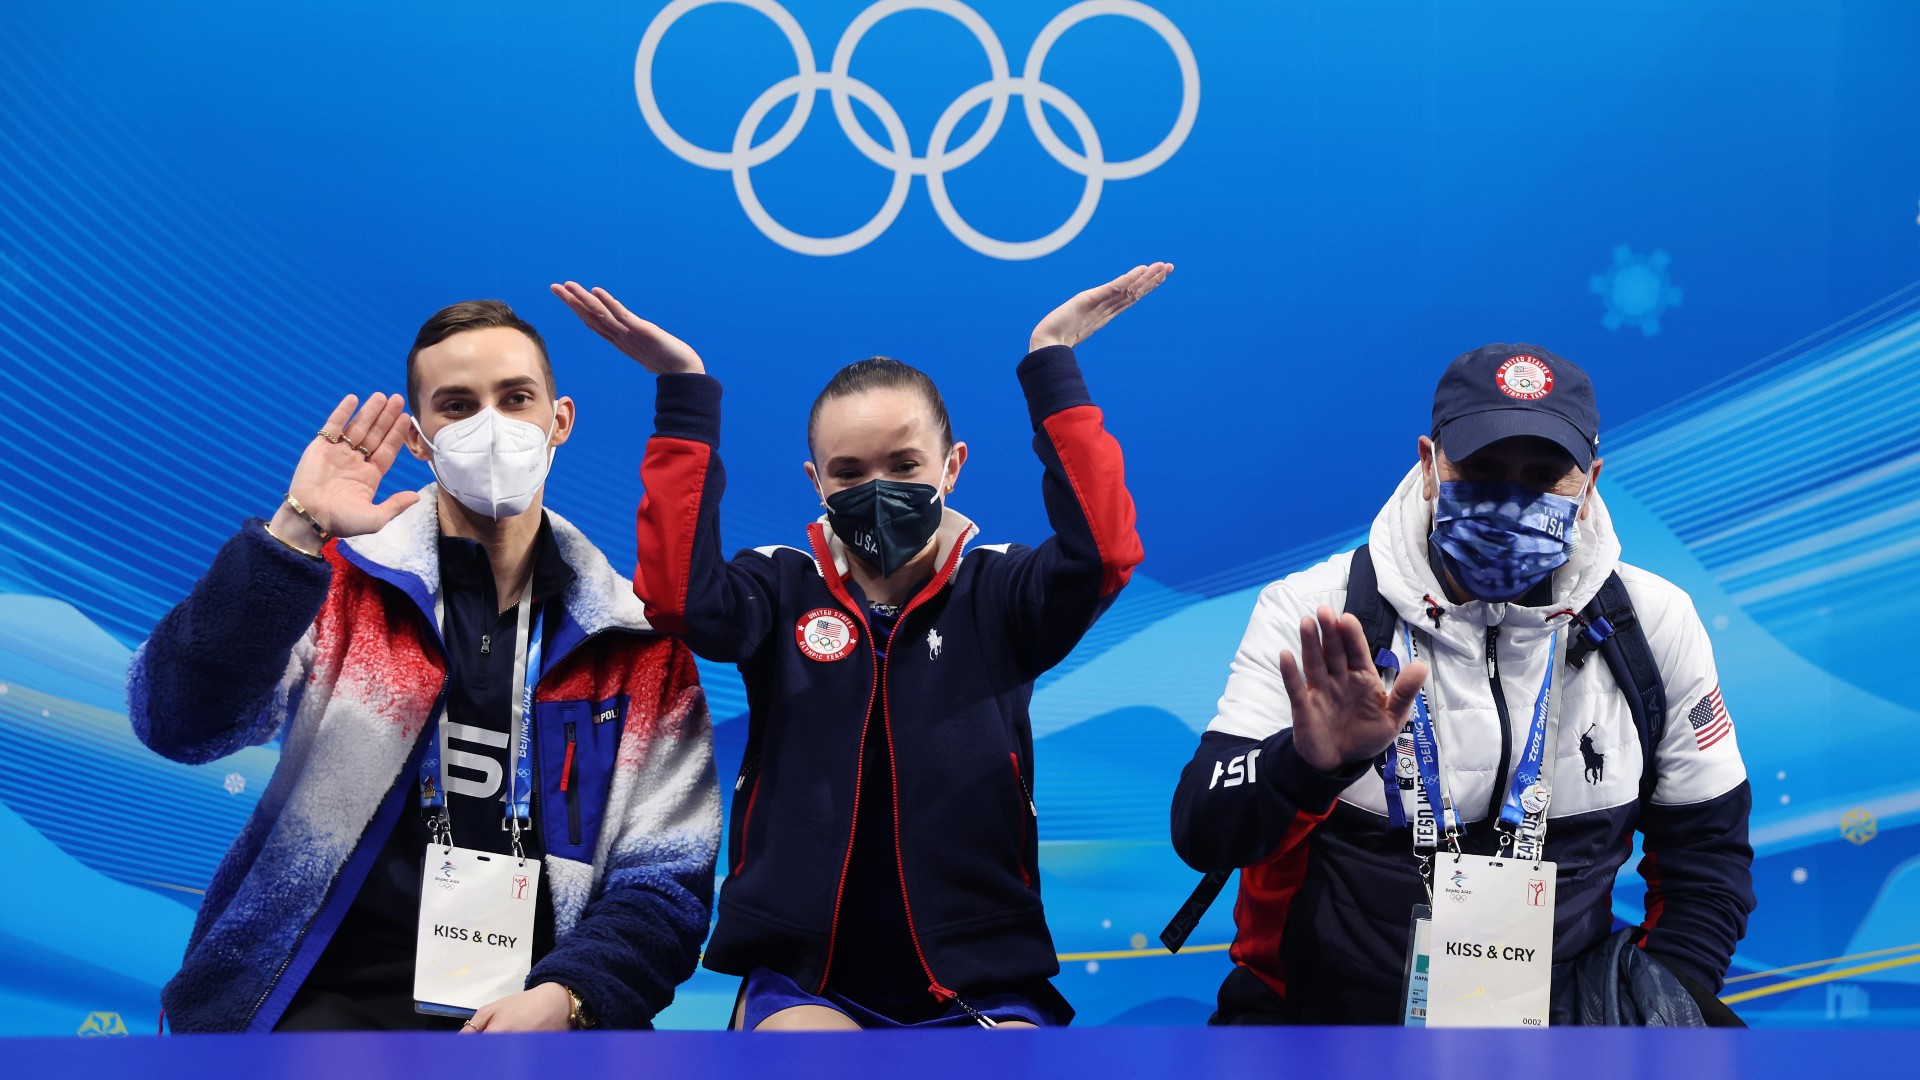 Olympics 2022: Team USA urges IOC to alter medal ceremony decision